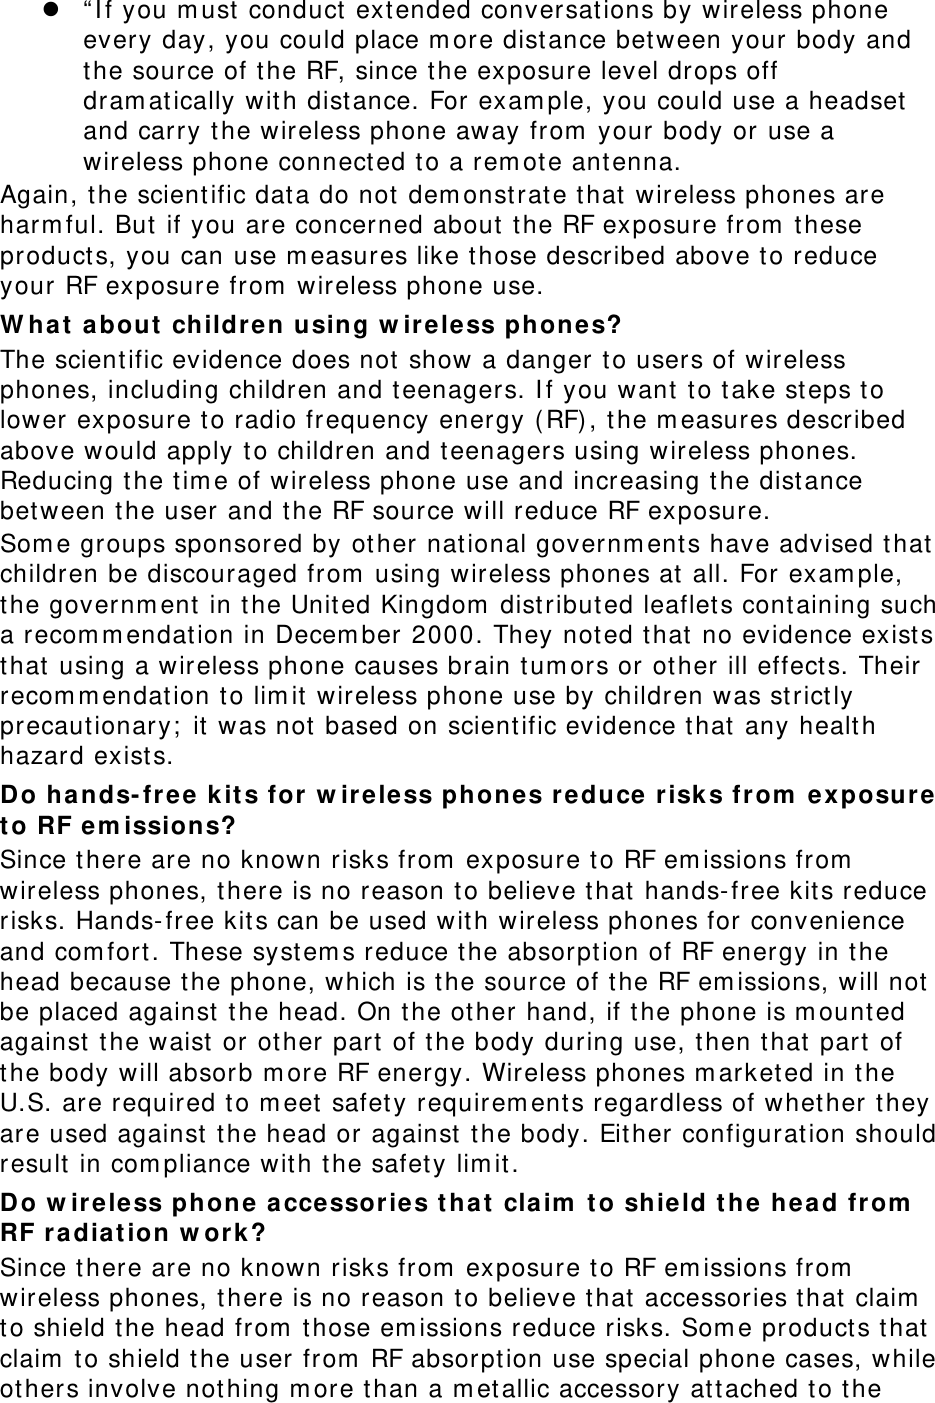  “If you must conduct extended conversations by wireless phone every day, you could place more distance between your body and the source of the RF, since the exposure level drops off dramatically with distance. For example, you could use a headset and carry the wireless phone away from your body or use a wireless phone connected to a remote antenna. Again, the scientific data do not demonstrate that wireless phones are harmful. But if you are concerned about the RF exposure from these products, you can use measures like those described above to reduce your RF exposure from wireless phone use. What about children using wireless phones? The scientific evidence does not show a danger to users of wireless phones, including children and teenagers. If you want to take steps to lower exposure to radio frequency energy (RF), the measures described above would apply to children and teenagers using wireless phones. Reducing the time of wireless phone use and increasing the distance between the user and the RF source will reduce RF exposure. Some groups sponsored by other national governments have advised that children be discouraged from using wireless phones at all. For example, the government in the United Kingdom distributed leaflets containing such a recommendation in December 2000. They noted that no evidence exists that using a wireless phone causes brain tumors or other ill effects. Their recommendation to limit wireless phone use by children was strictly precautionary; it was not based on scientific evidence that any health hazard exists.  Do hands-free kits for wireless phones reduce risks from exposure to RF emissions? Since there are no known risks from exposure to RF emissions from wireless phones, there is no reason to believe that hands-free kits reduce risks. Hands-free kits can be used with wireless phones for convenience and comfort. These systems reduce the absorption of RF energy in the head because the phone, which is the source of the RF emissions, will not be placed against the head. On the other hand, if the phone is mounted against the waist or other part of the body during use, then that part of the body will absorb more RF energy. Wireless phones marketed in the U.S. are required to meet safety requirements regardless of whether they are used against the head or against the body. Either configuration should result in compliance with the safety limit. Do wireless phone accessories that claim to shield the head from RF radiation work? Since there are no known risks from exposure to RF emissions from wireless phones, there is no reason to believe that accessories that claim to shield the head from those emissions reduce risks. Some products that claim to shield the user from RF absorption use special phone cases, while others involve nothing more than a metallic accessory attached to the 